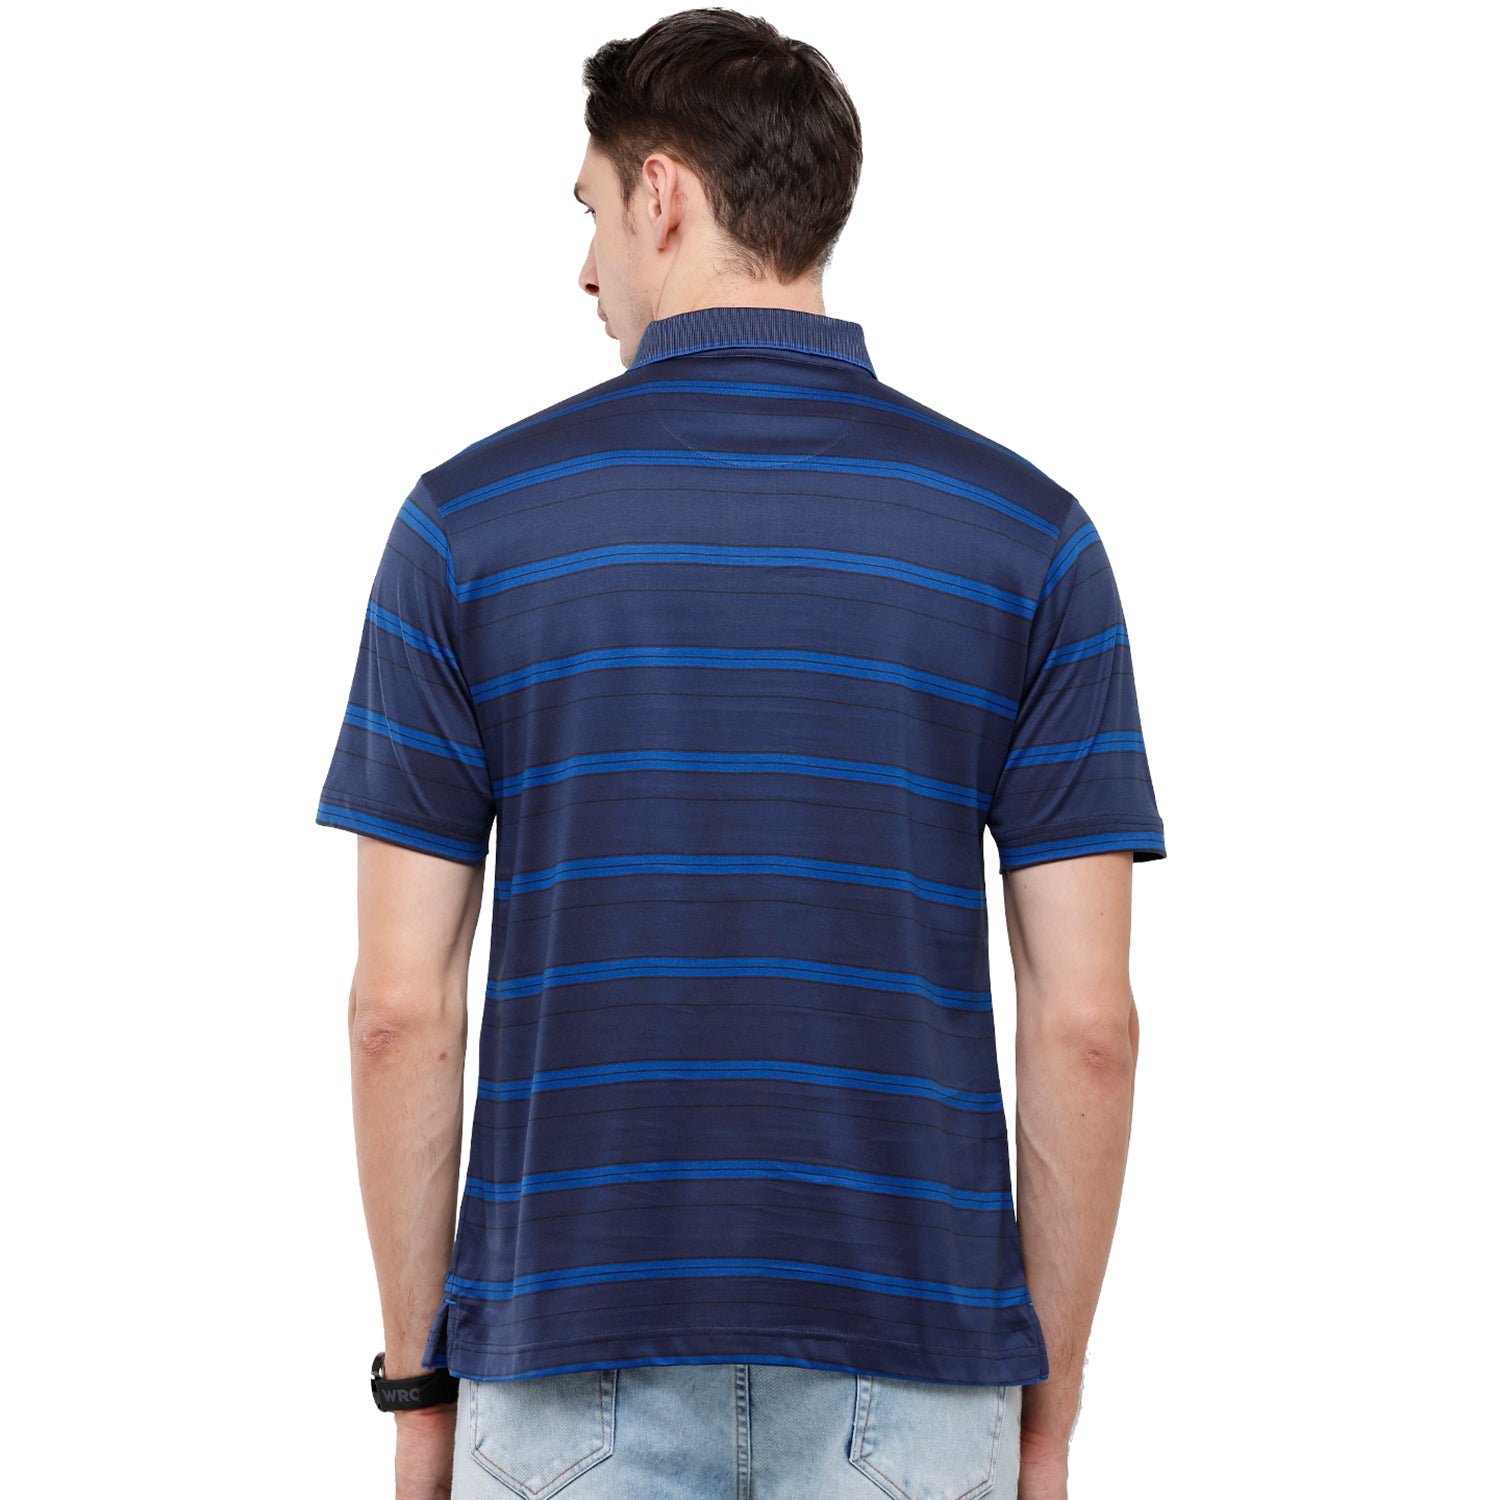 Classic Polo Men's Striped Authentic Fit Half Sleeve Premium Navy Blue Stripe T-Shirt - Ultimo258 B AF P T-shirt Classic Polo 